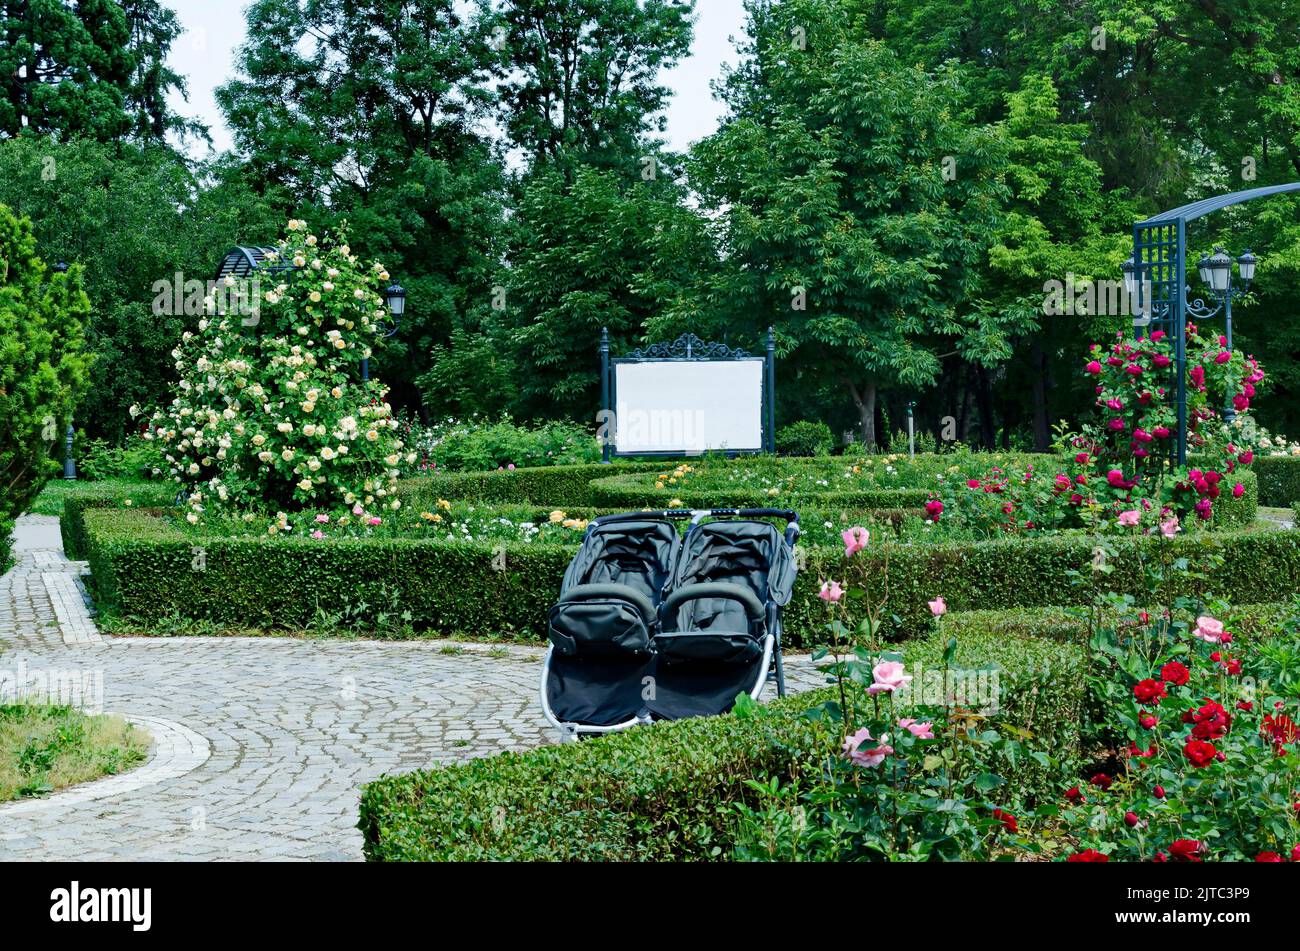 Part of a rose garden with beautiful bushes in bloom and a parked pram or baby stroller, Sofia, Bulgaria Stock Photo